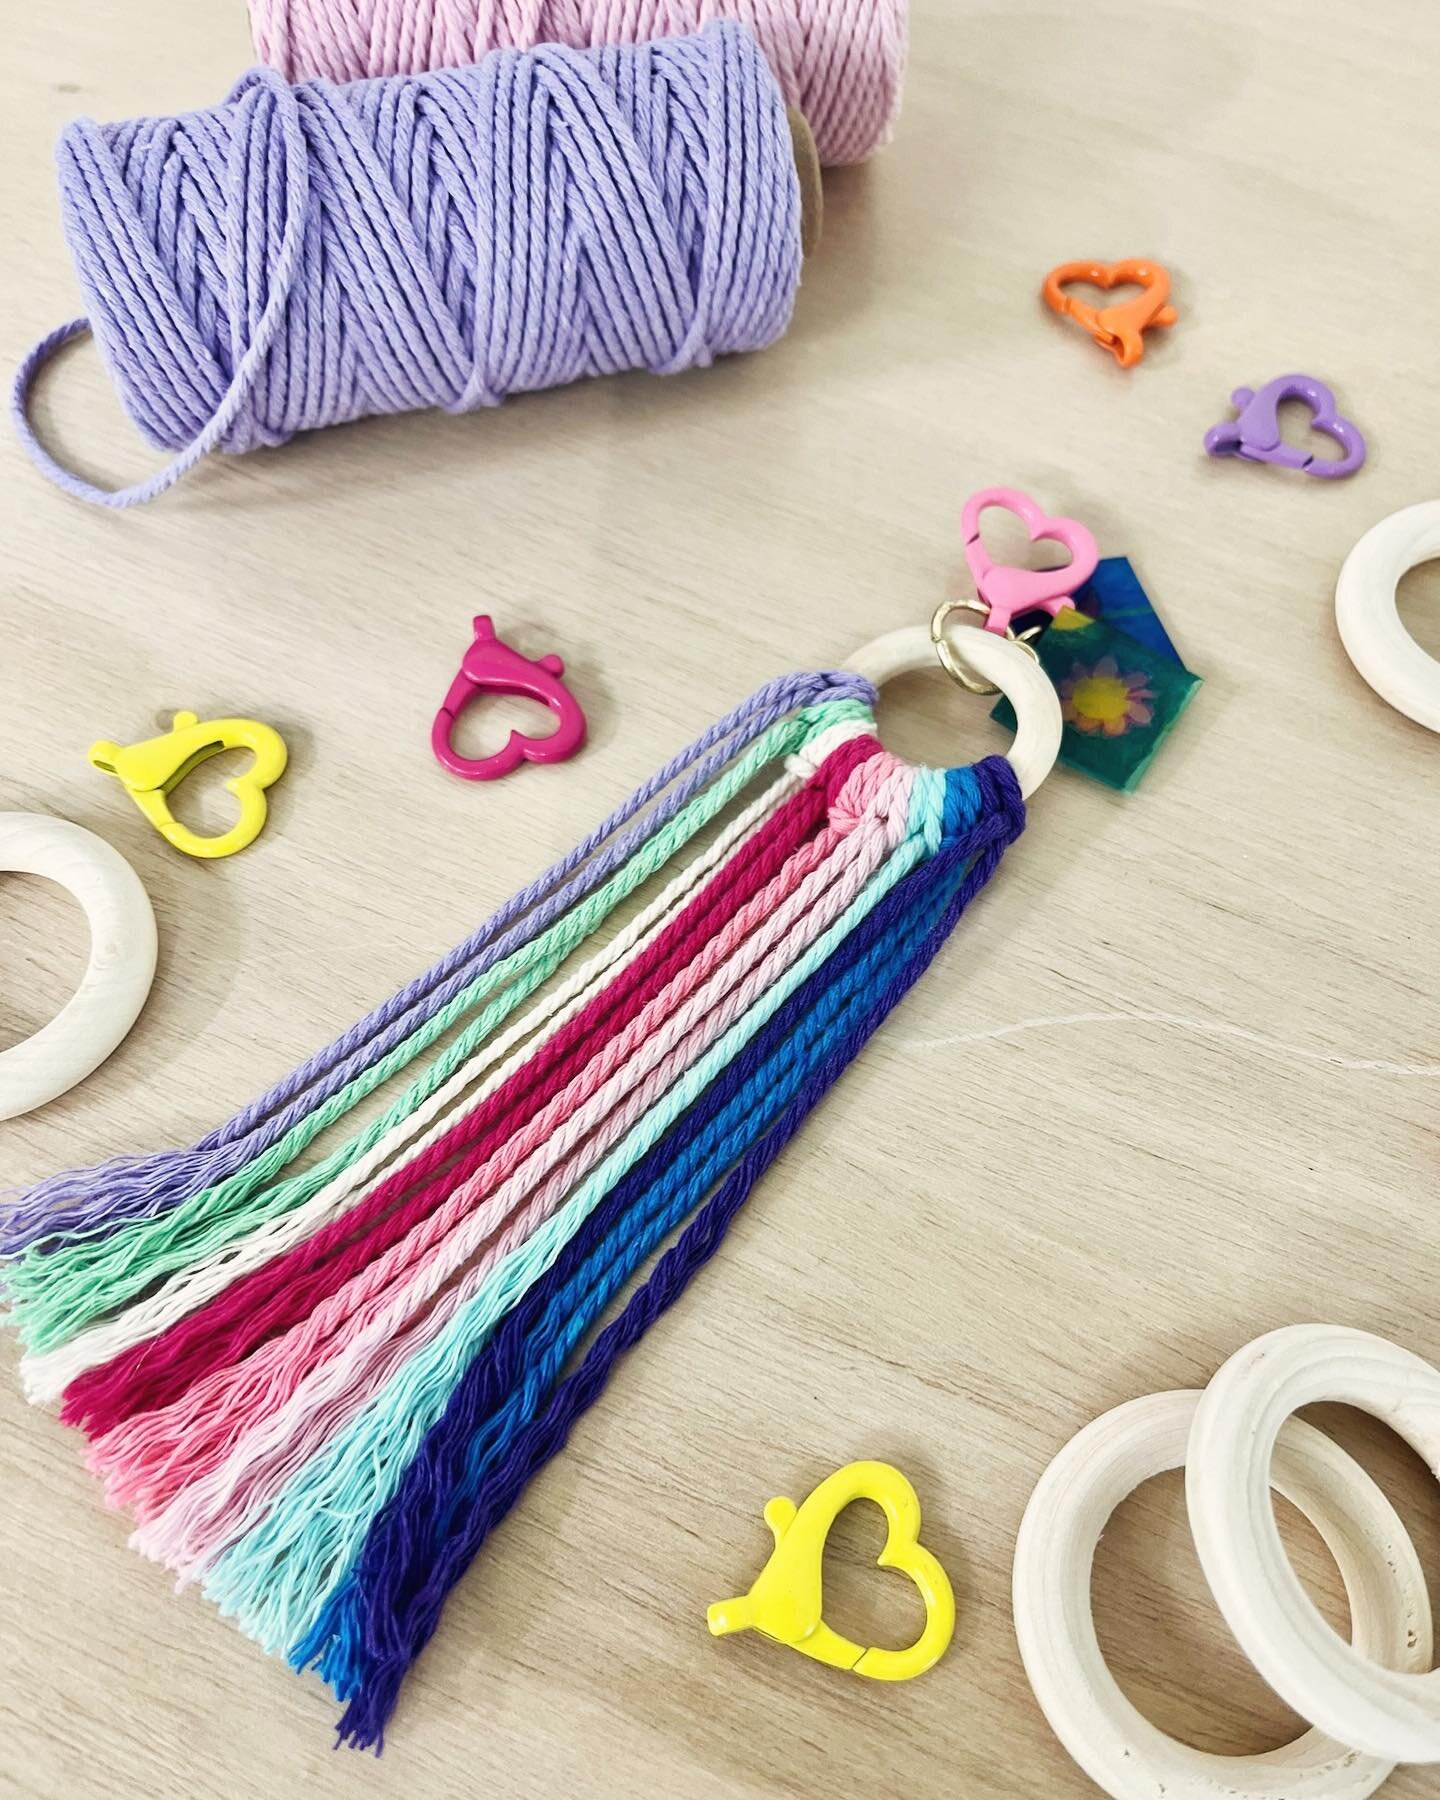 We adore these tassel keychains the mini makers created!